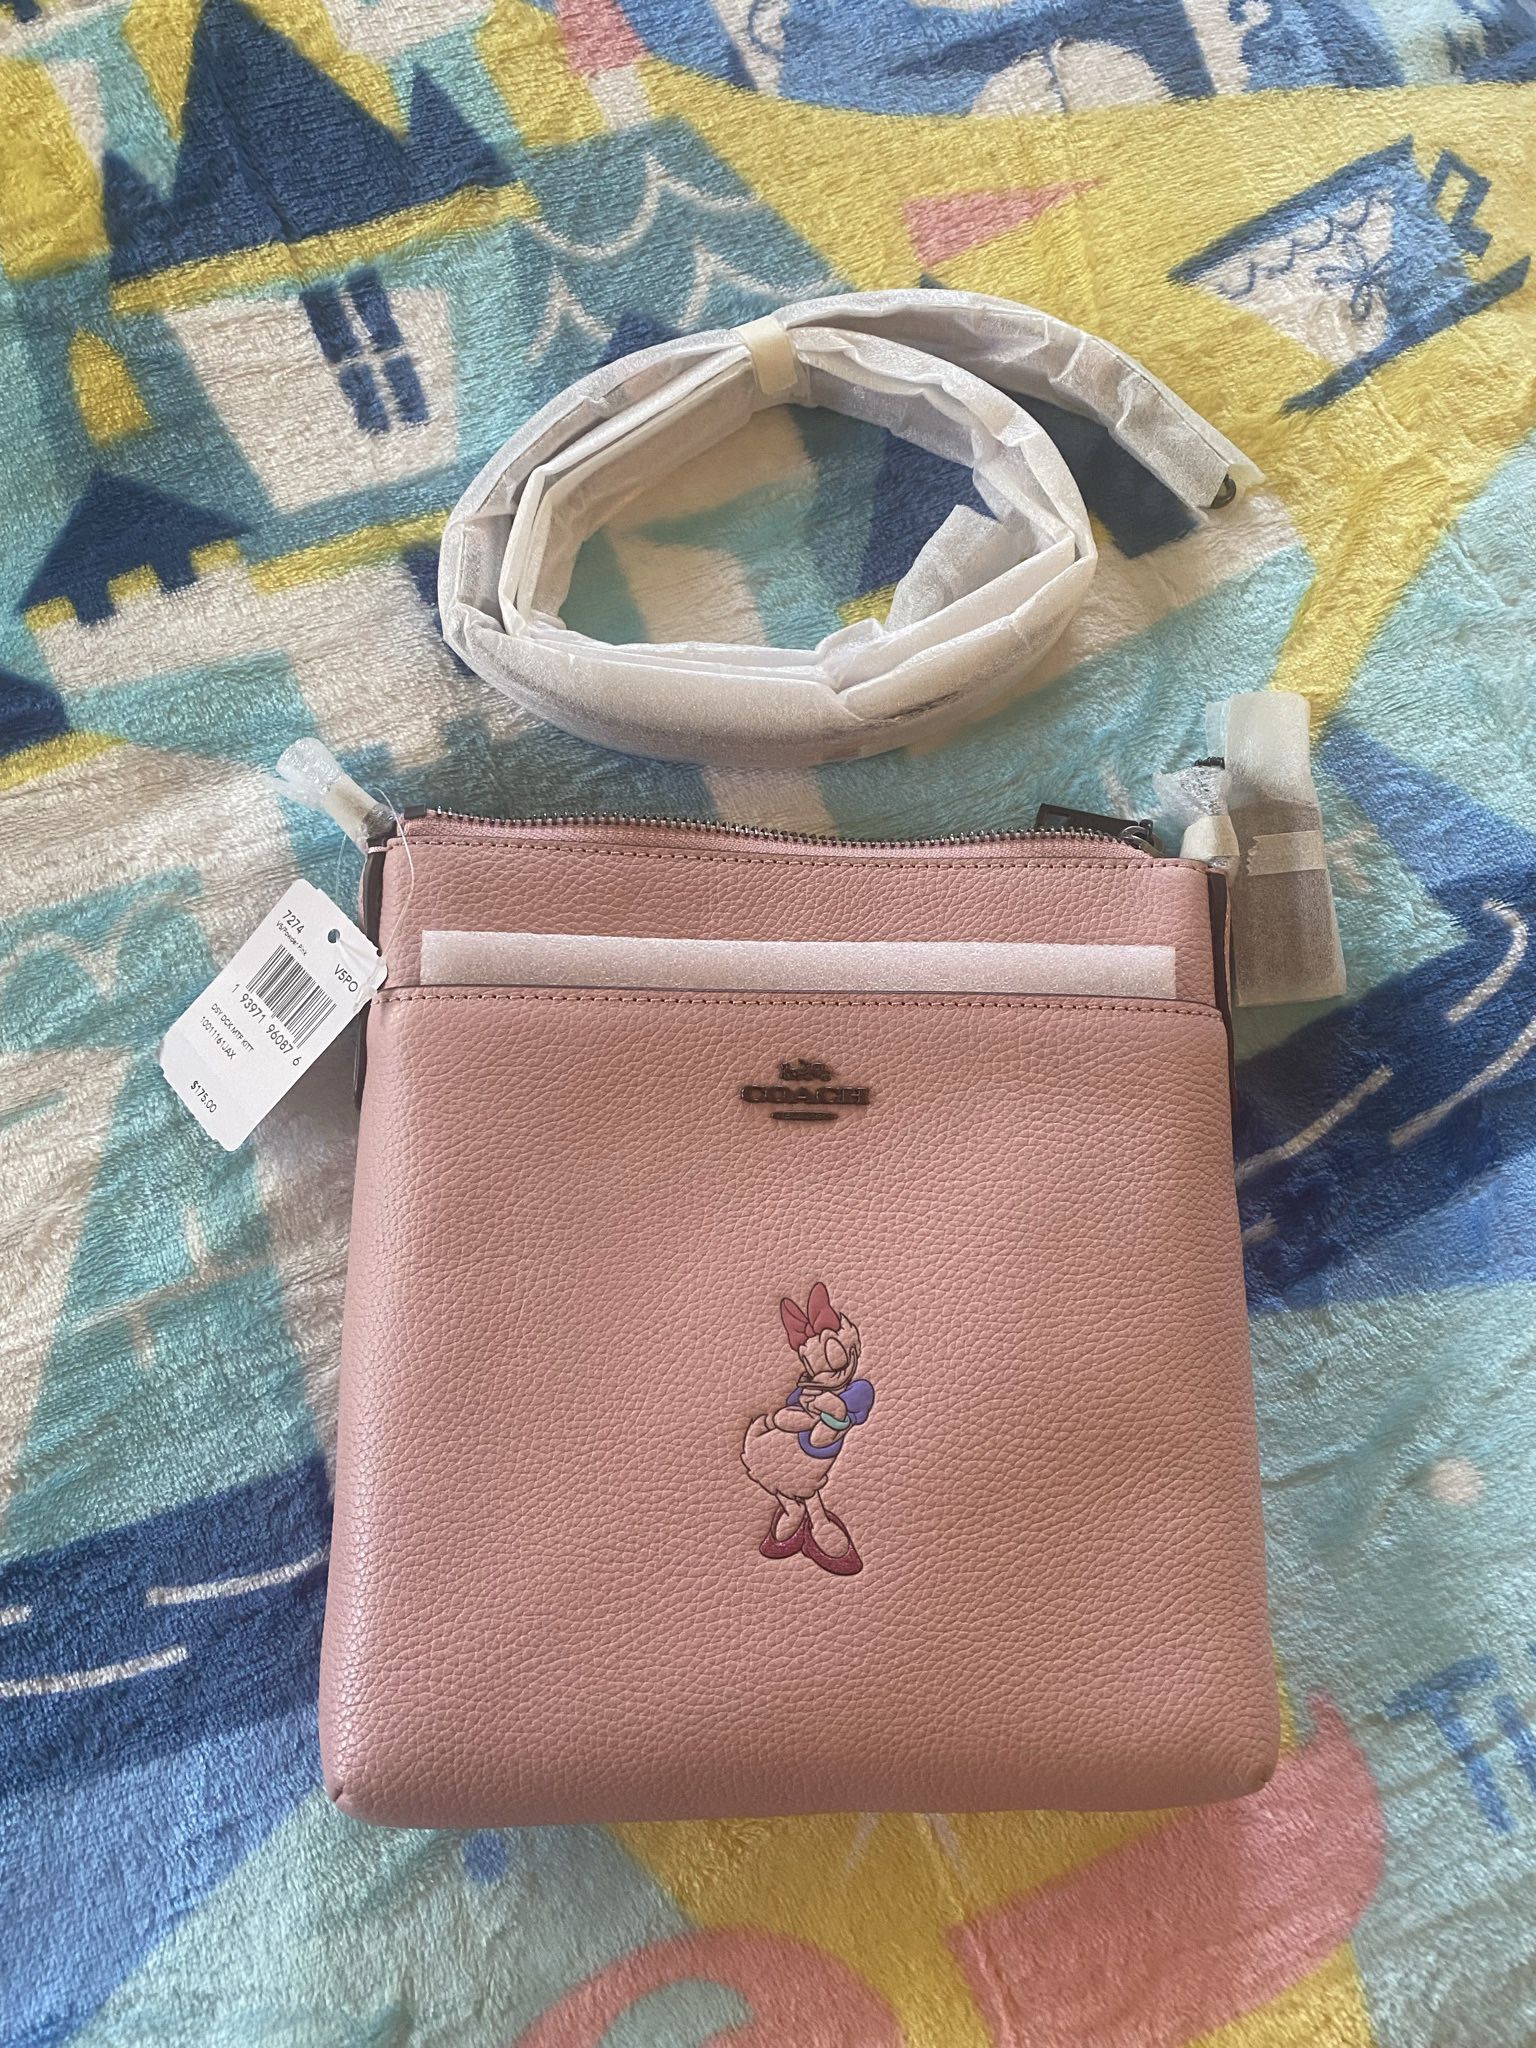 Disney Villains Coach Crossbody for Sale in Tacoma, WA - OfferUp